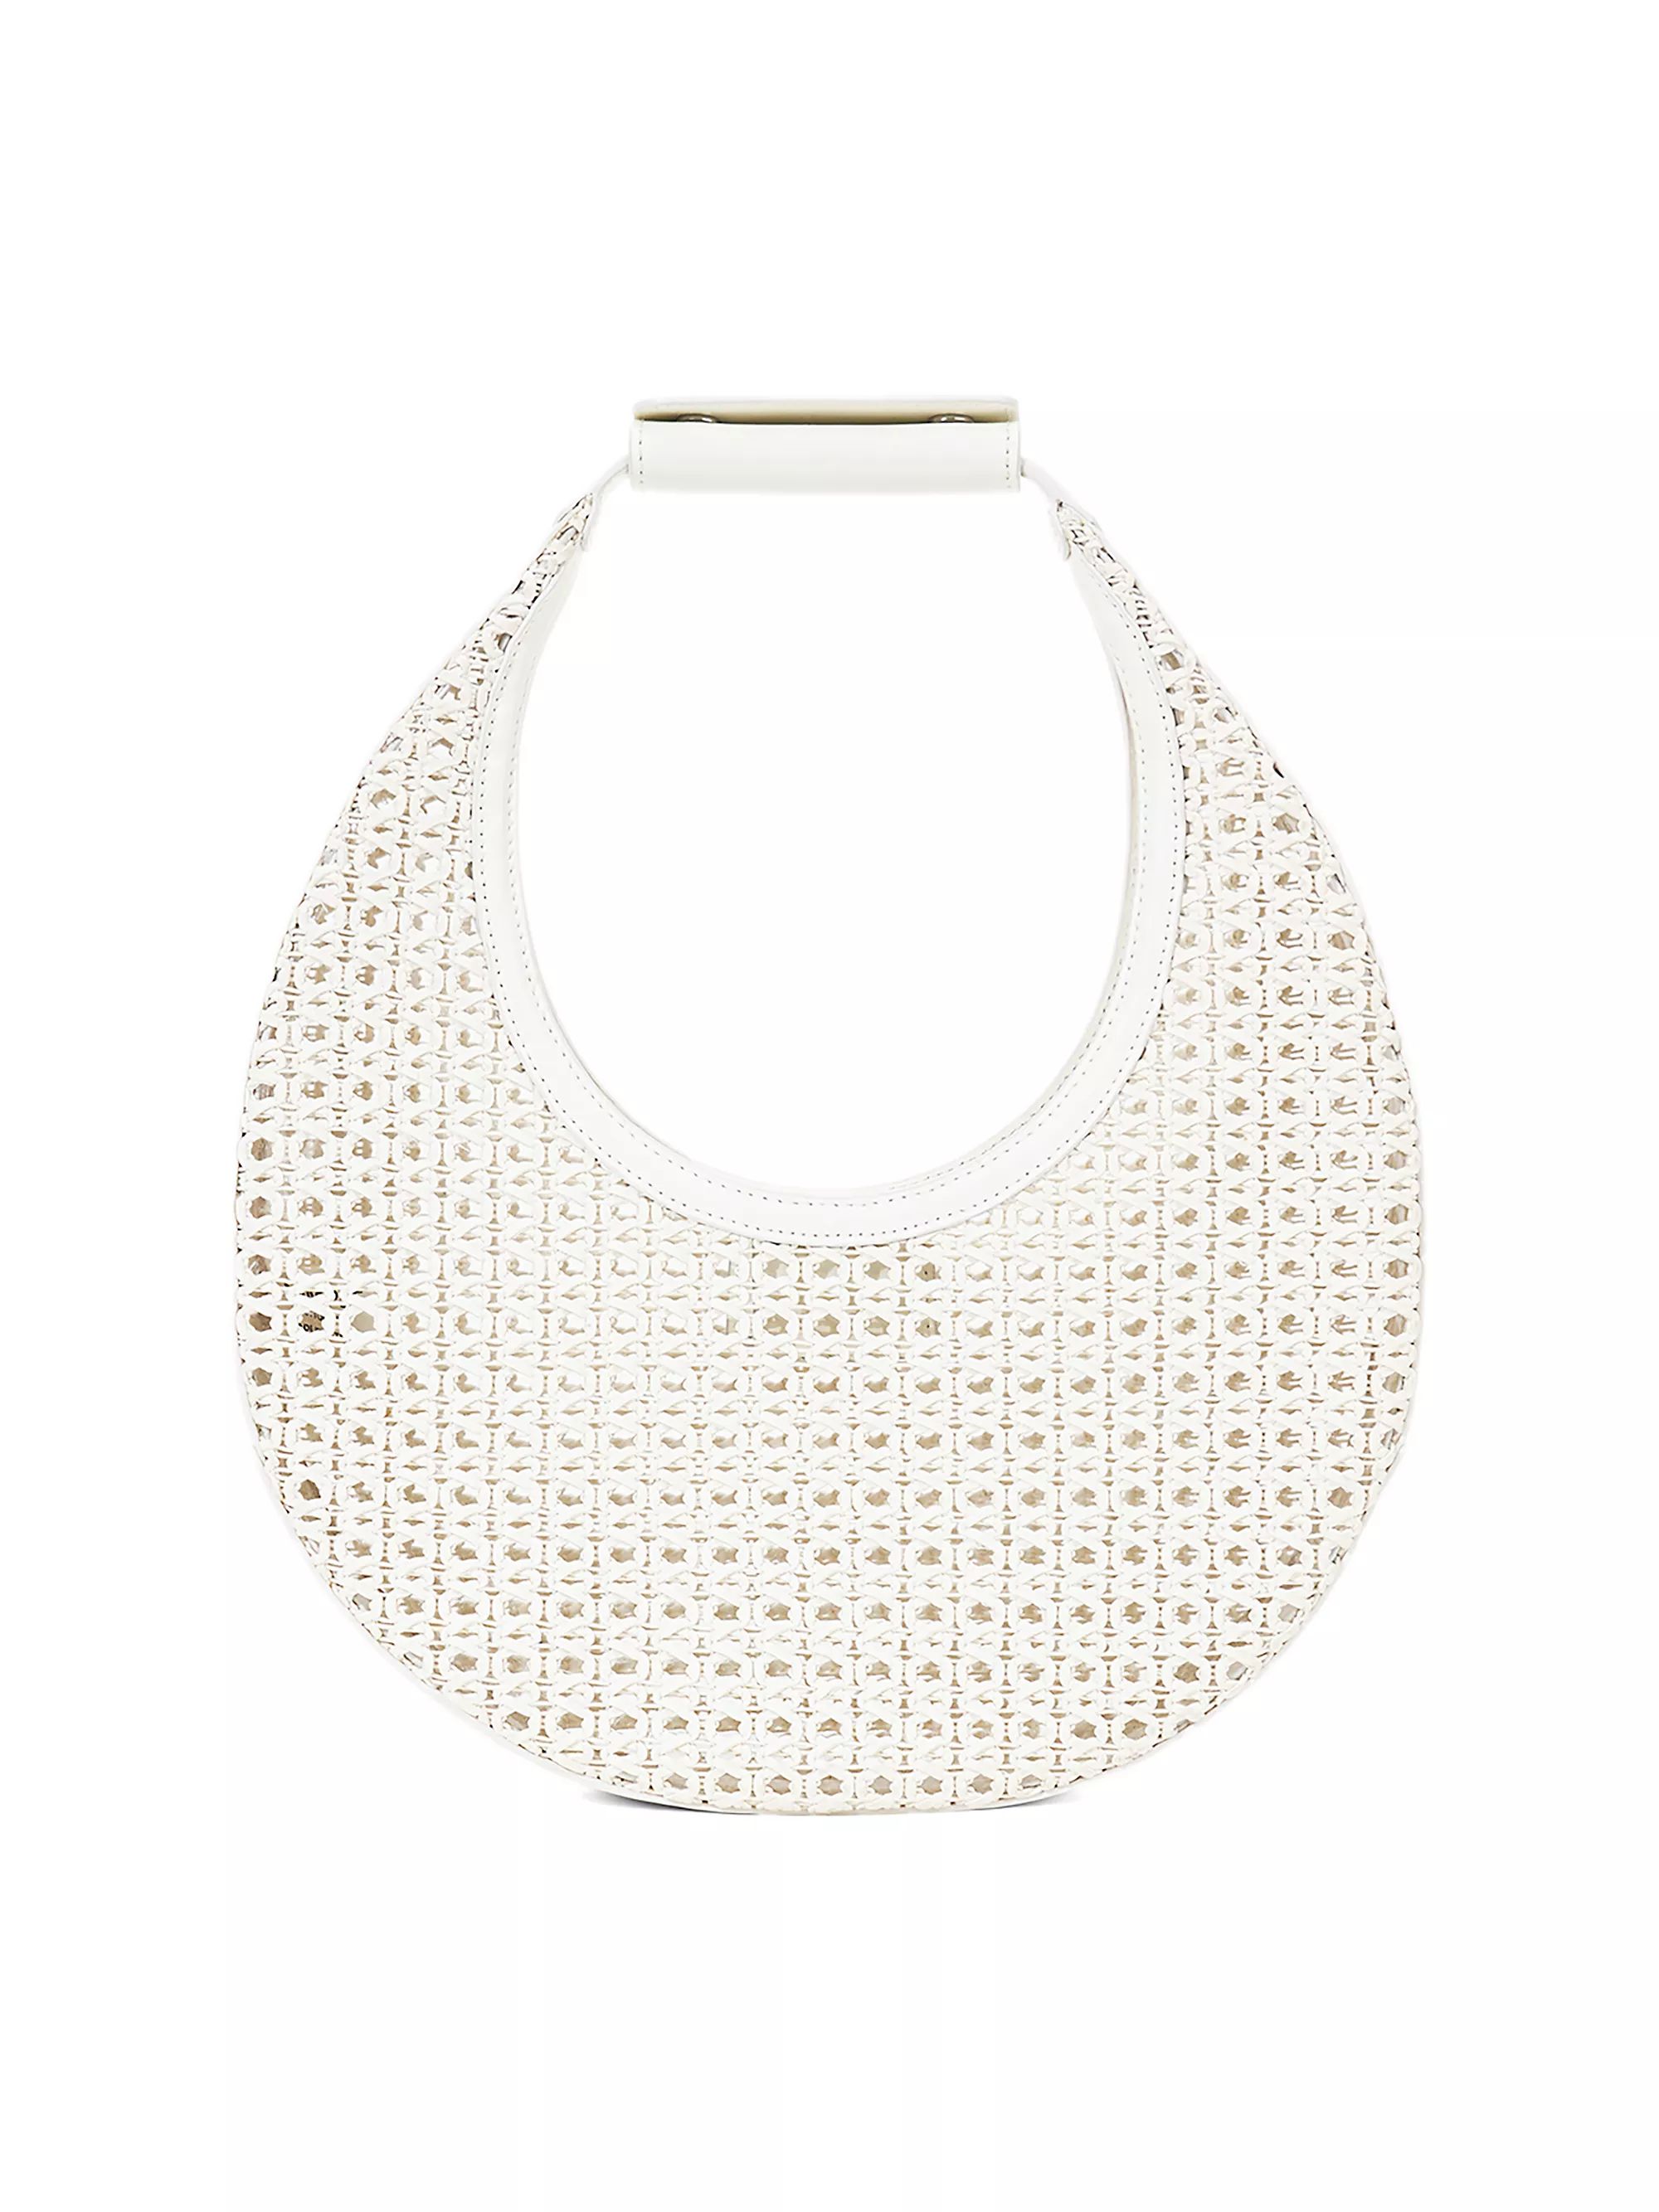 Moon Woven Paper Tote Bag | Saks Fifth Avenue